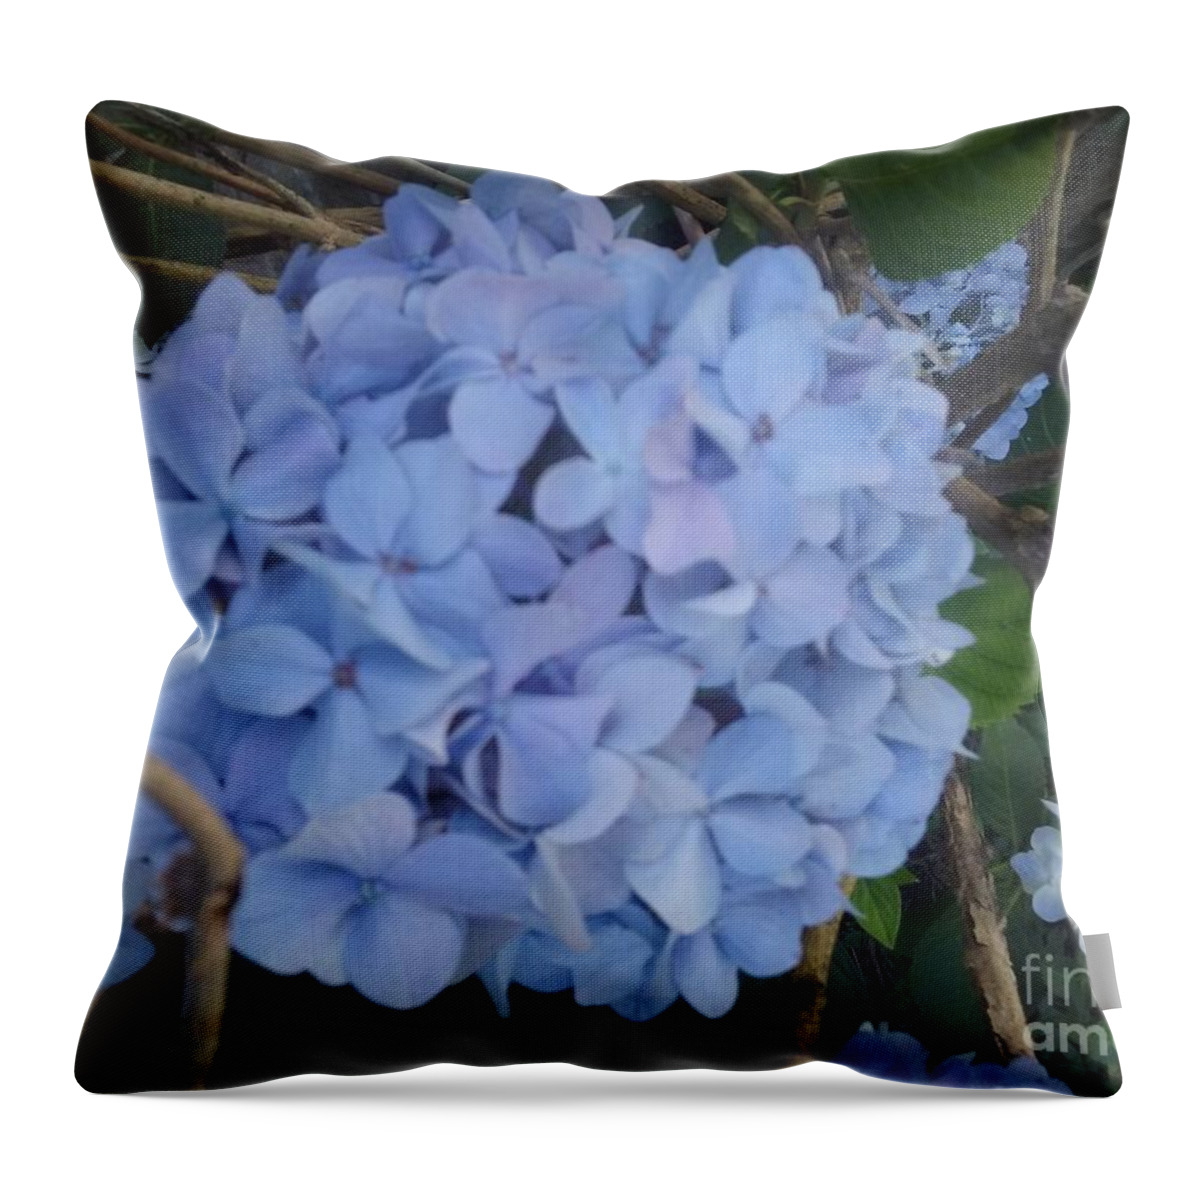 Courageous Throw Pillow featuring the photograph Courageous Hydrangea by Seaux-N-Seau Soileau